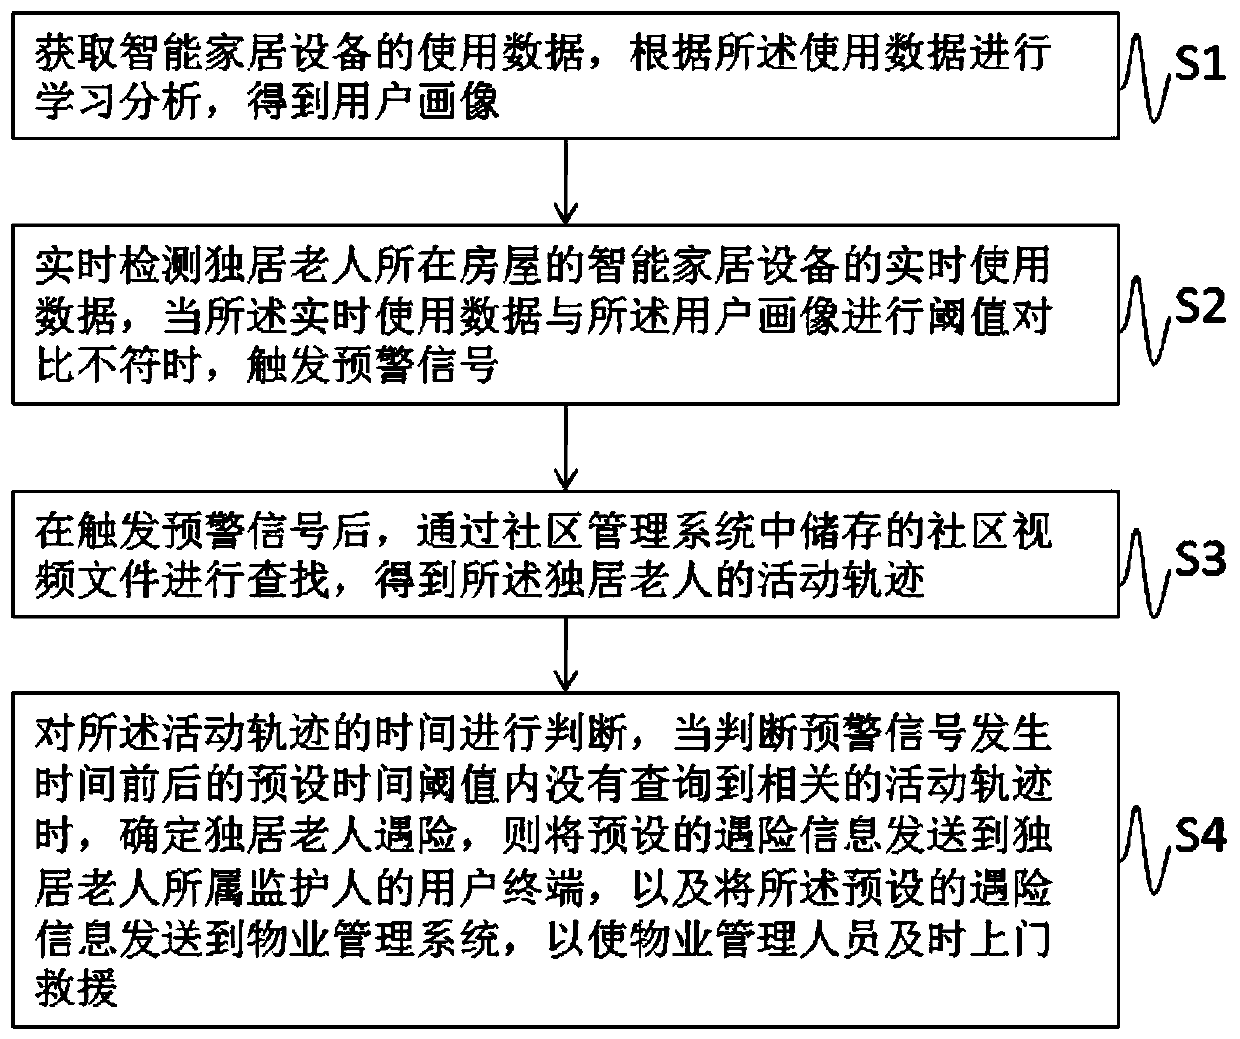 Linkage control early warning method and system of accidental occurrence of elderly people living alone